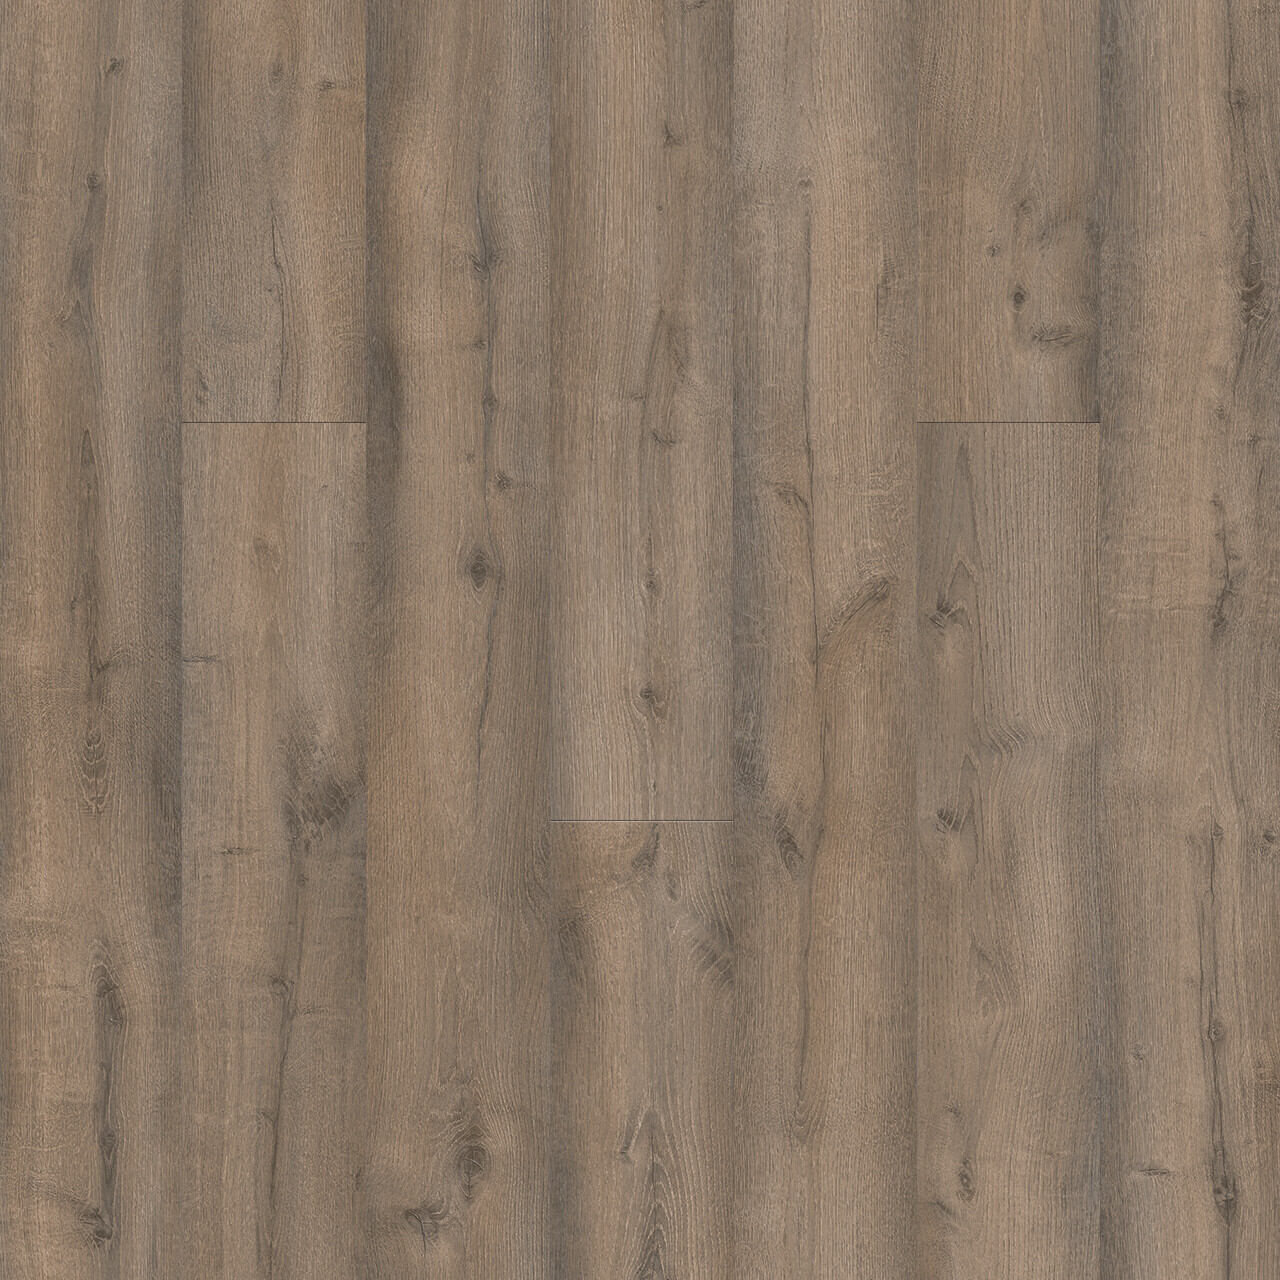 Engineered Floors - Wood Lux Collection - 8 in. x 54 in. - Berlin